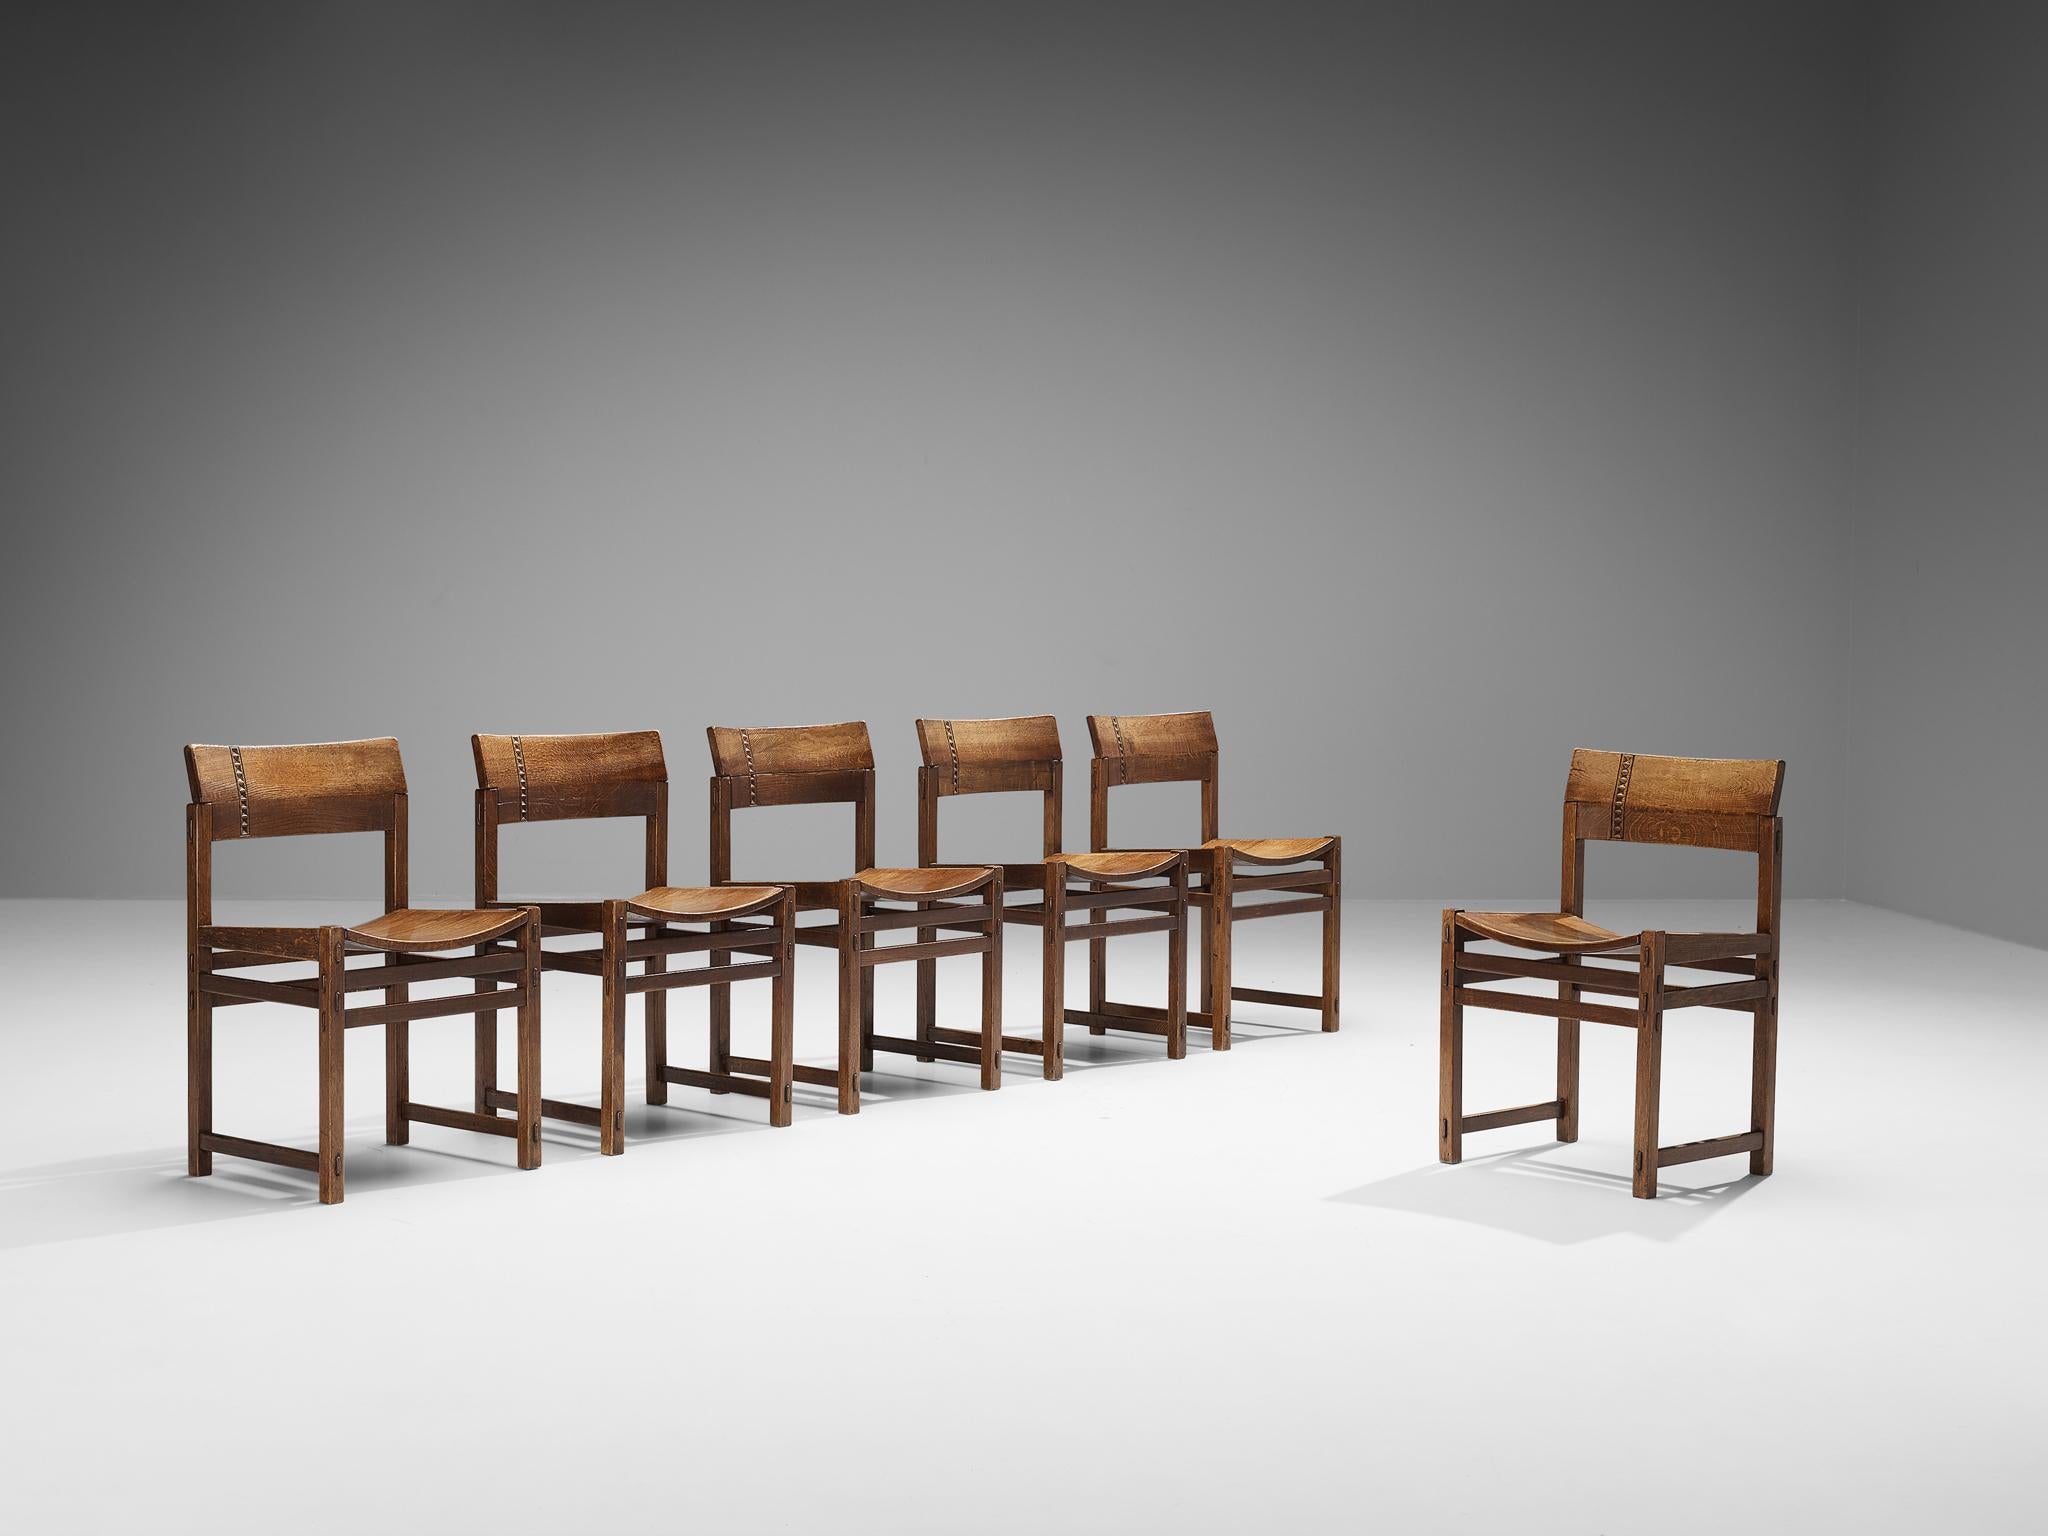 Giuseppe Rivadossi for Officina Rivadossi, set of six dining chairs, oak, Italy, 1970s

An exceptional set of chairs by the Italian sculptor and designer Giuseppe Rivadossi. The chairs are architecturally built based on the assemblage of parts